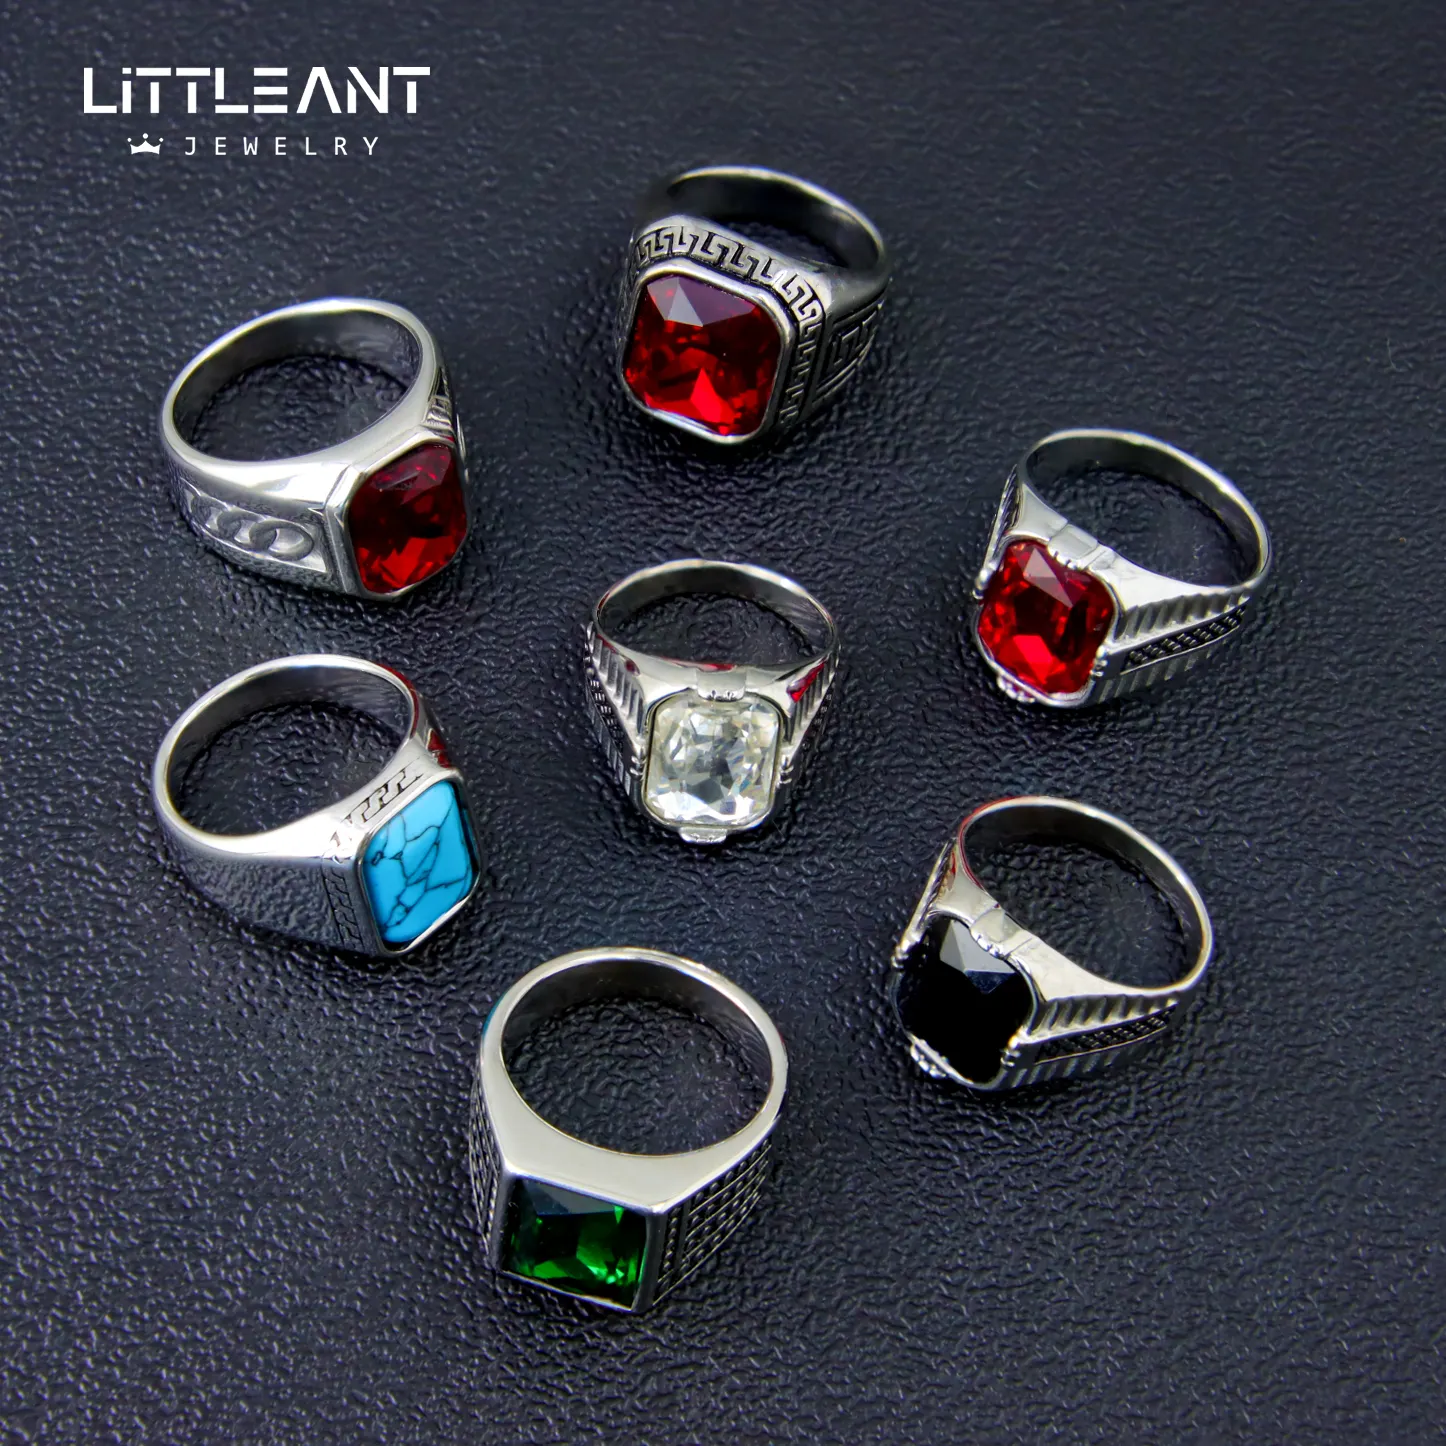 Little Ant New Luxury Red   Black Zircon Hiphop Jewelry Ring Stainless Steel Men's Ring Wholesale